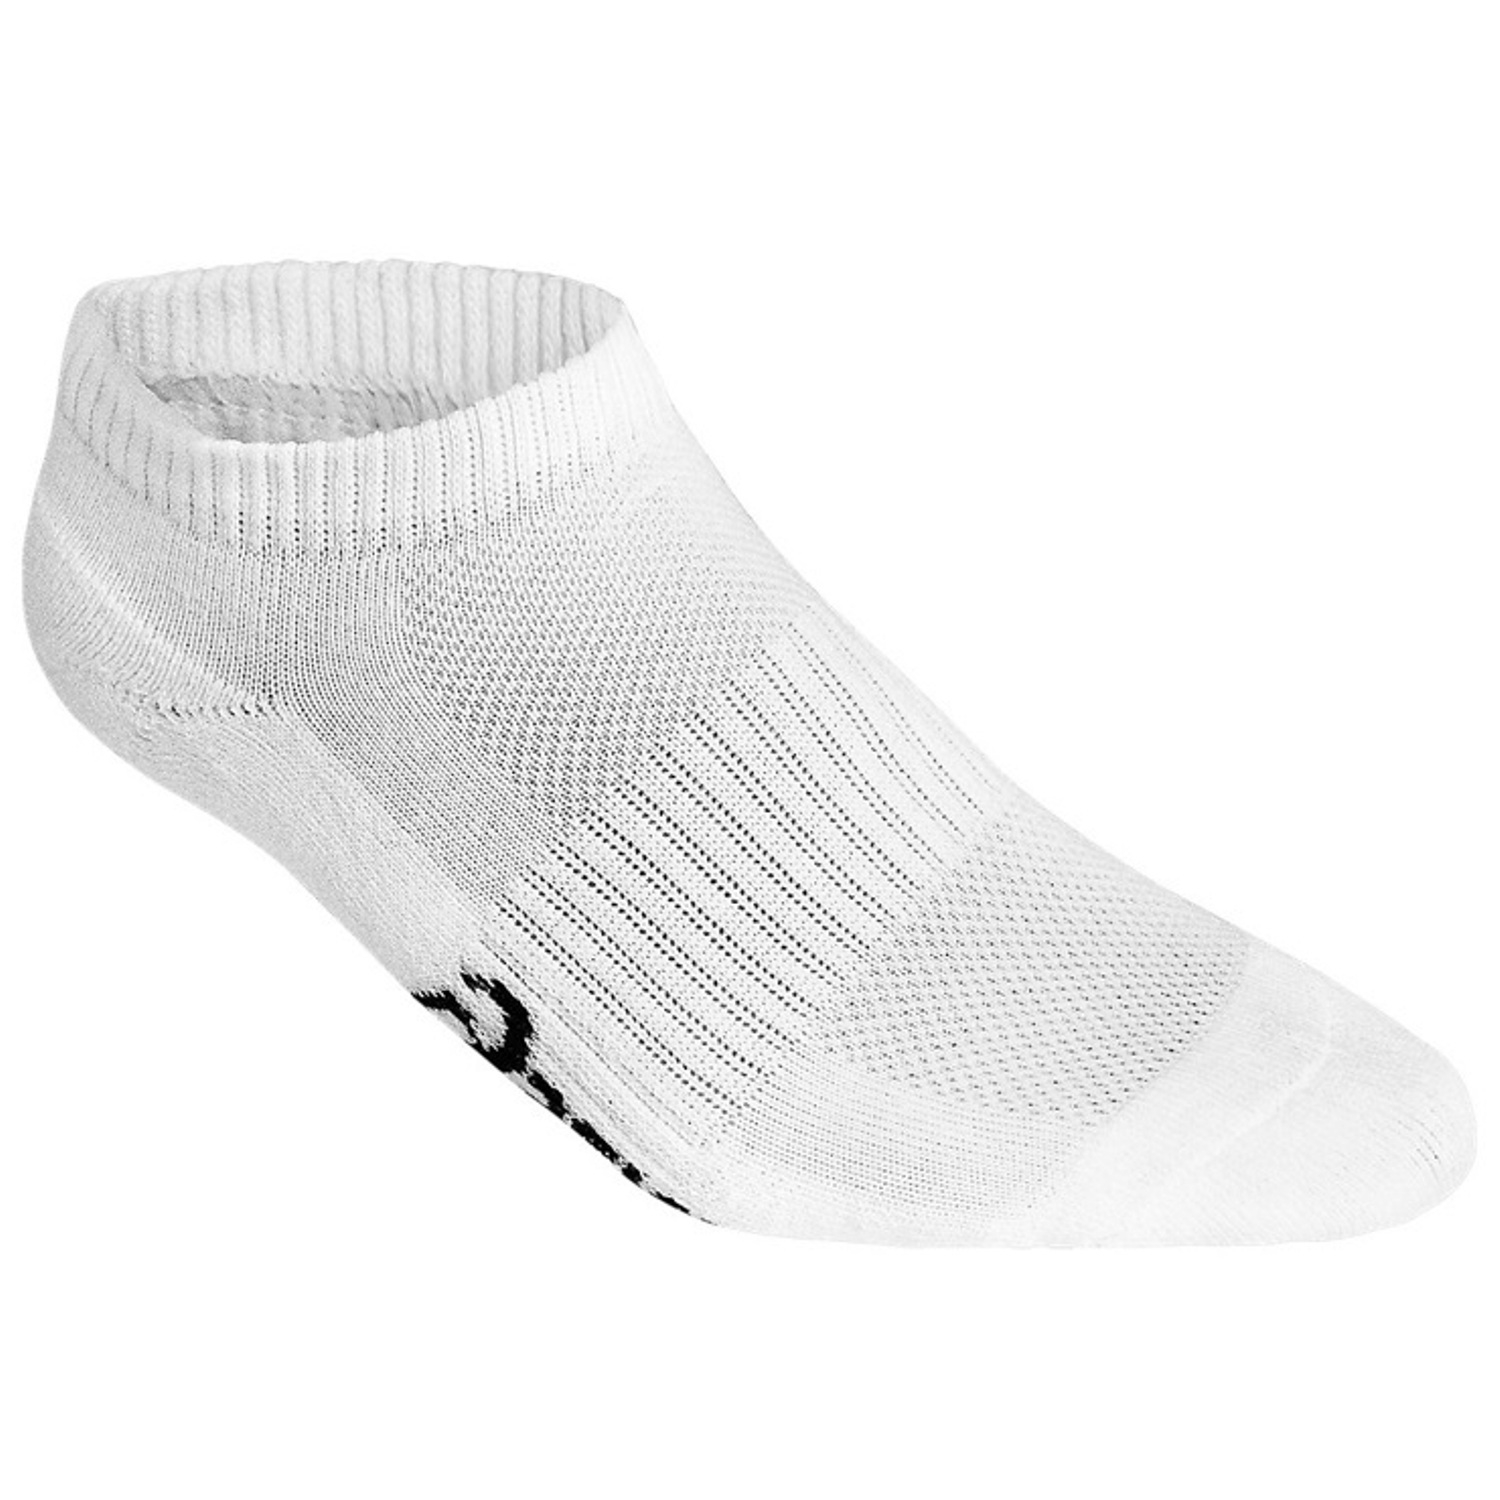 Asics Pace Low Socks: White | Mike Pawley Sports